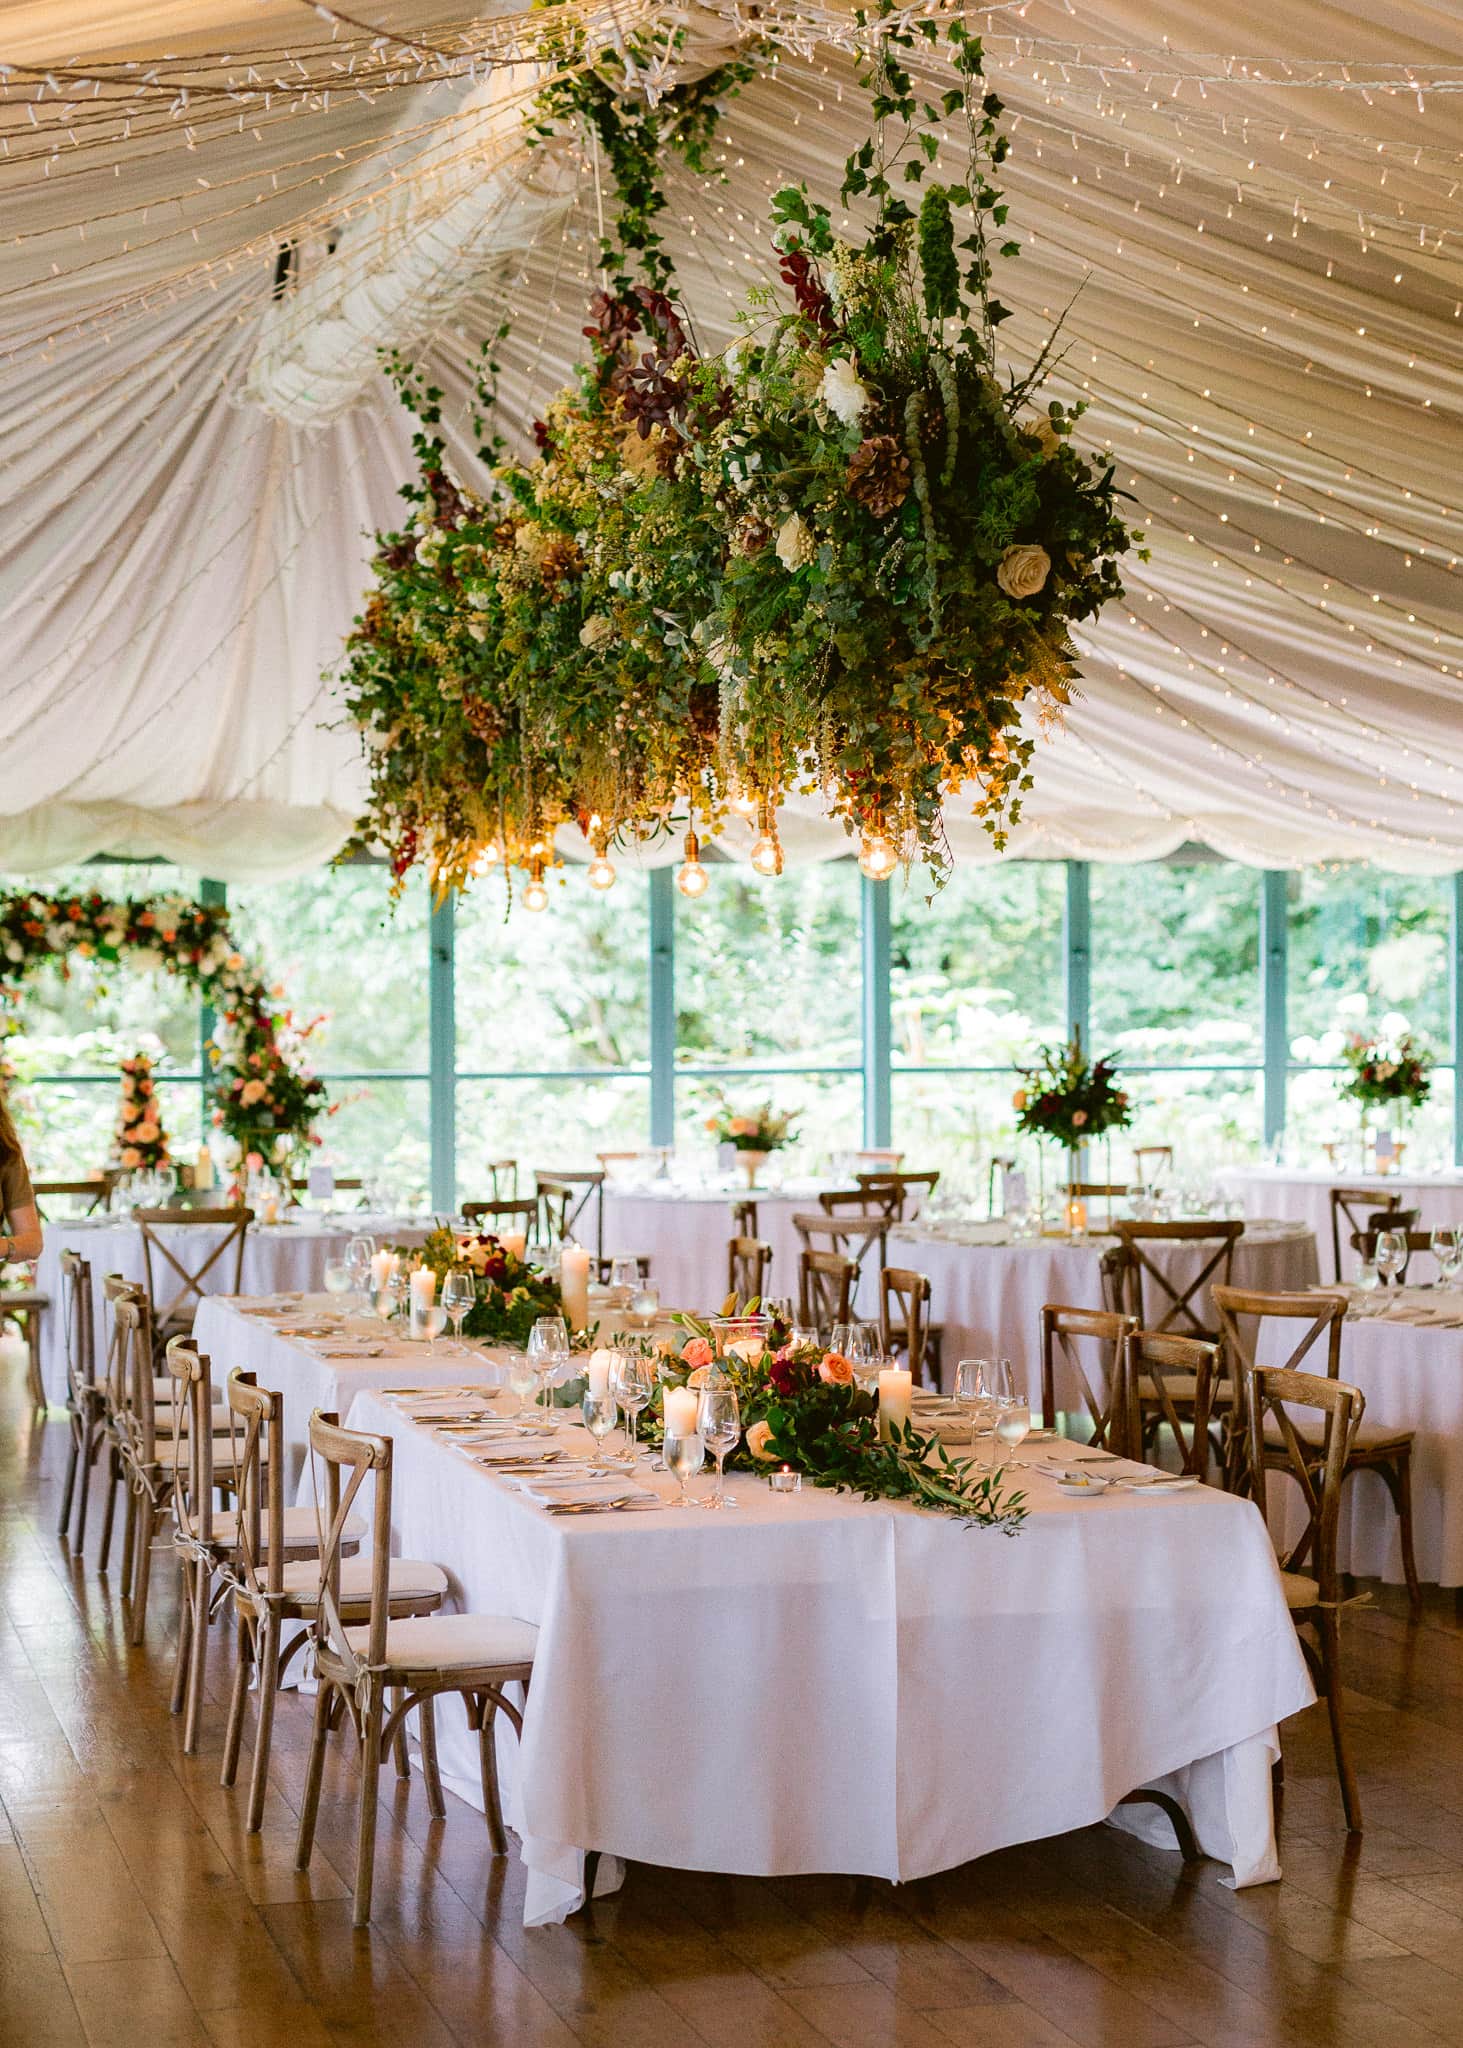 Decorations-Top-table-wedding-at-Virginia-Park-Lodge